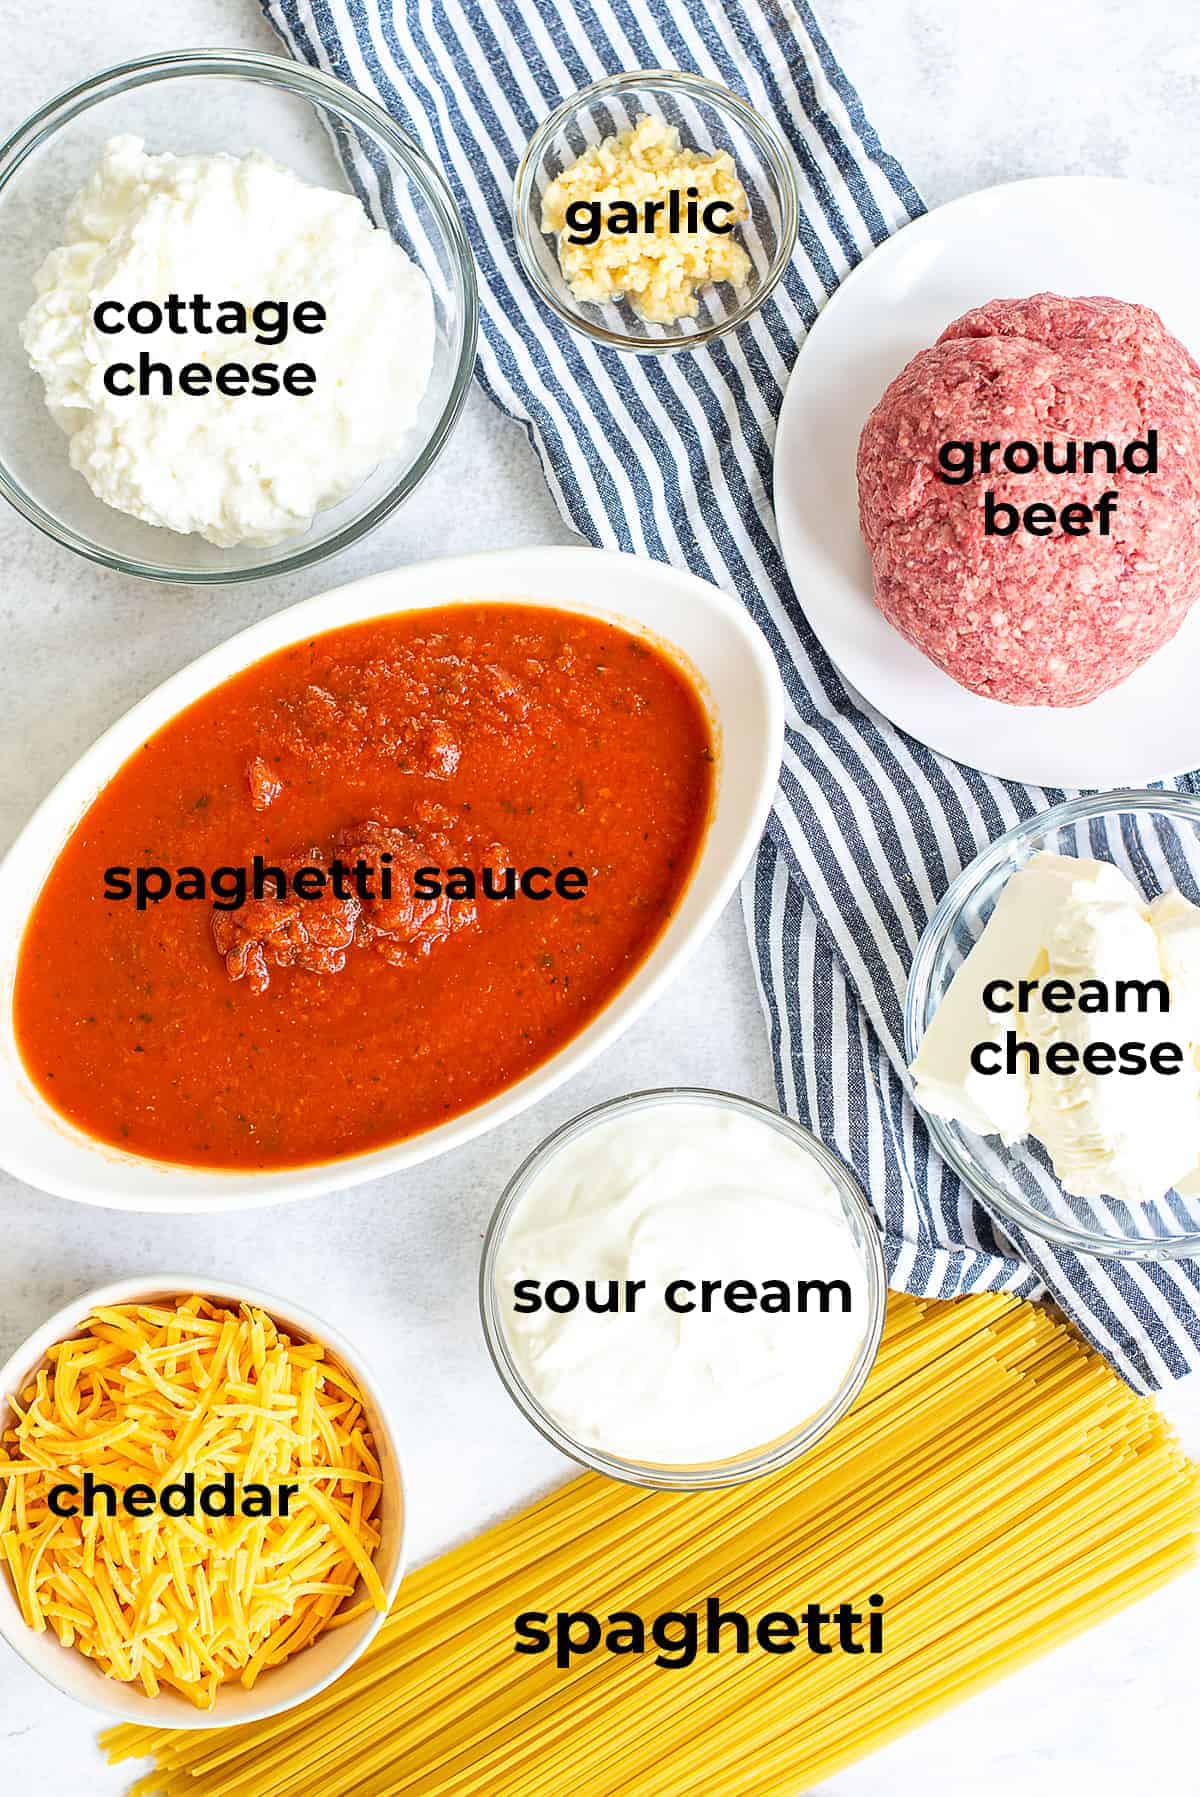 ingredients for creamy baked spaghetti laid out on counter.